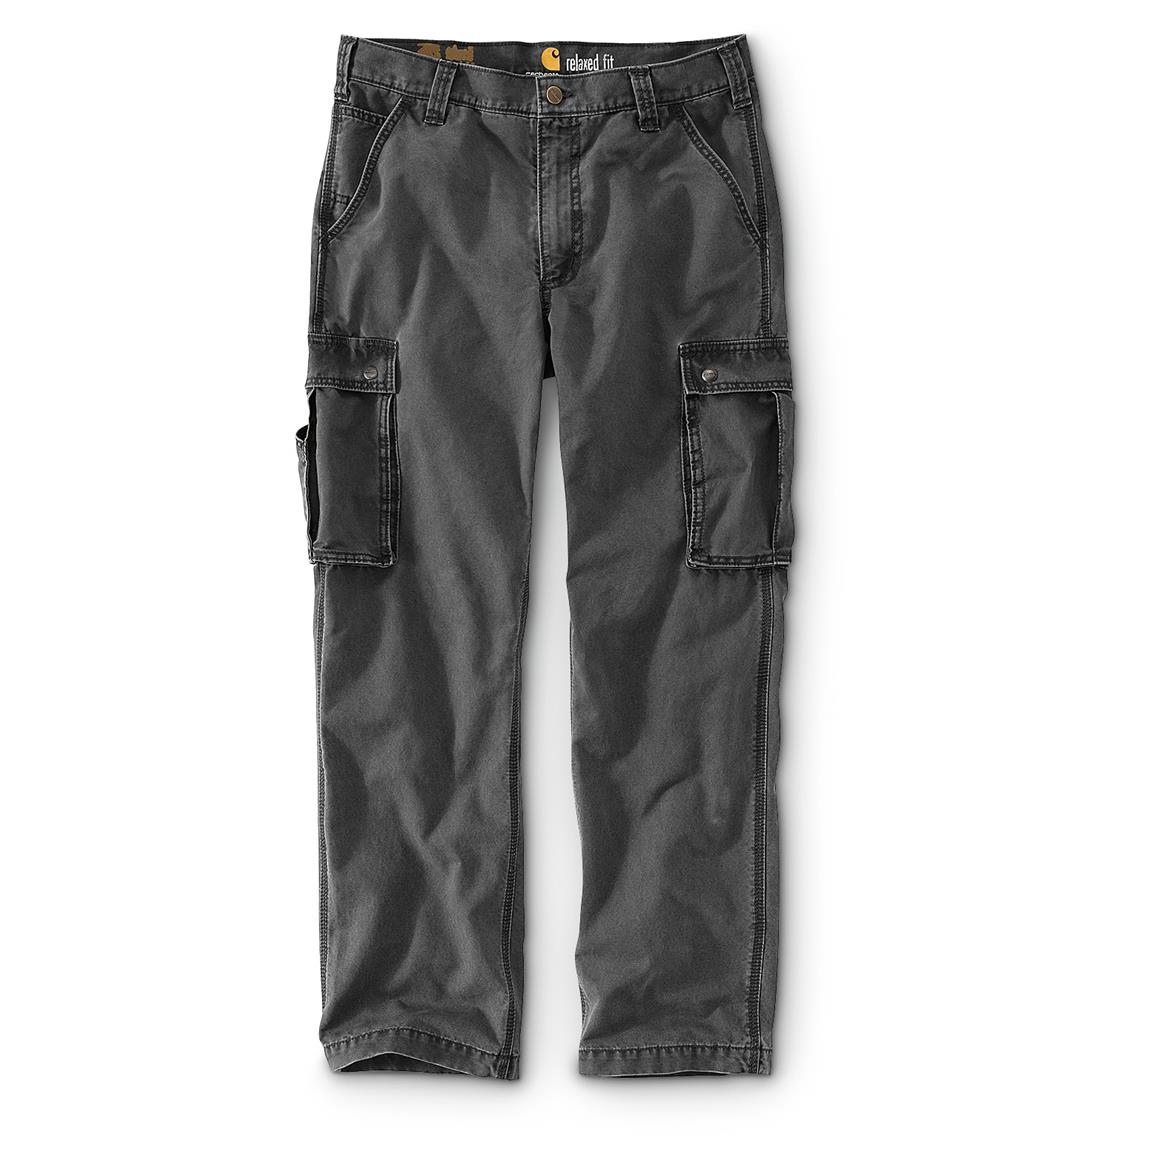 Carhartt Rugged Cargo Pants - 635647, Jeans & Pants at 365 Outdoor Wear